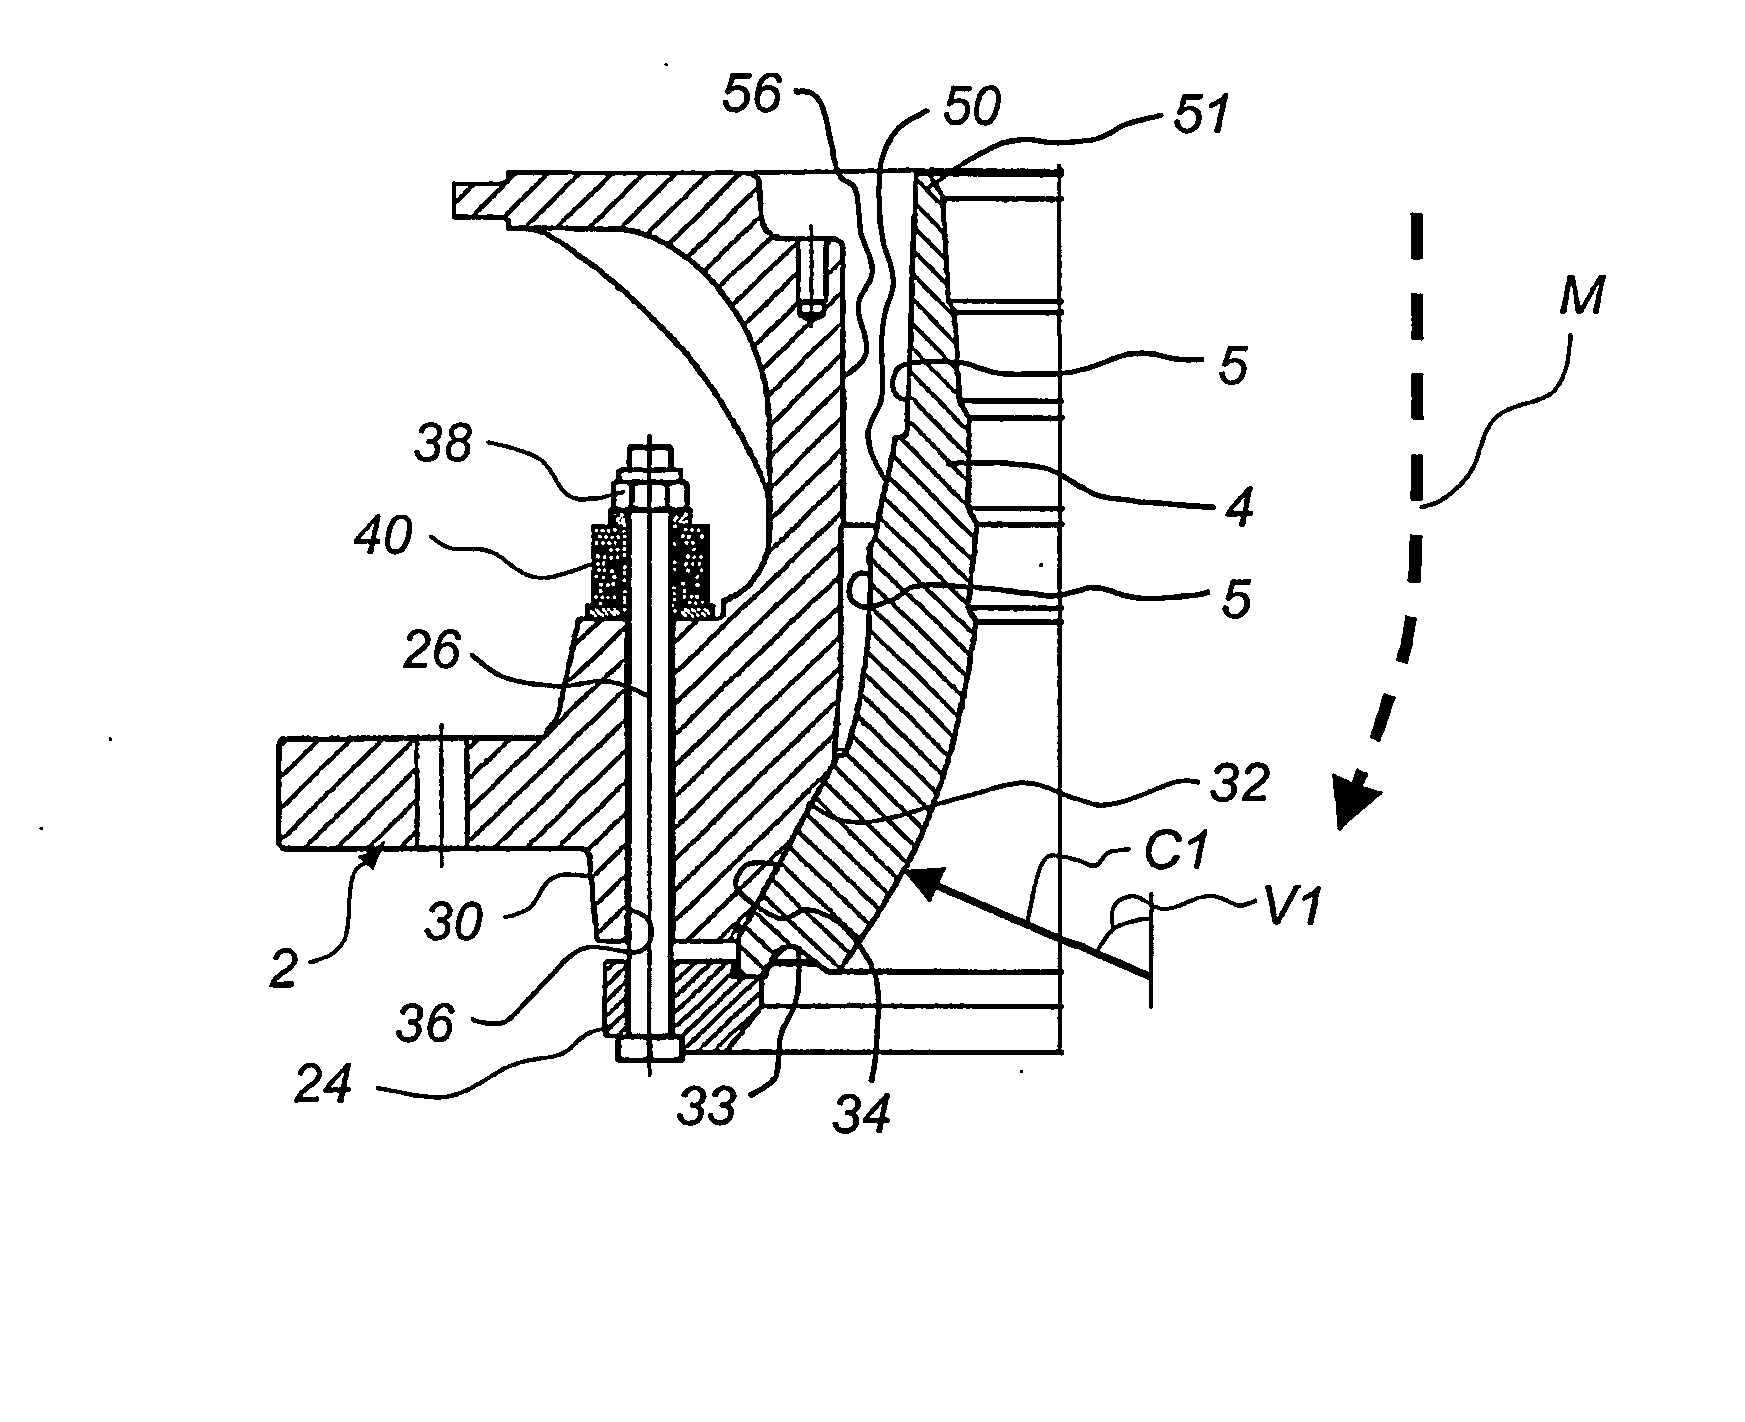 Method and Device for Clamping of Crushing Shell